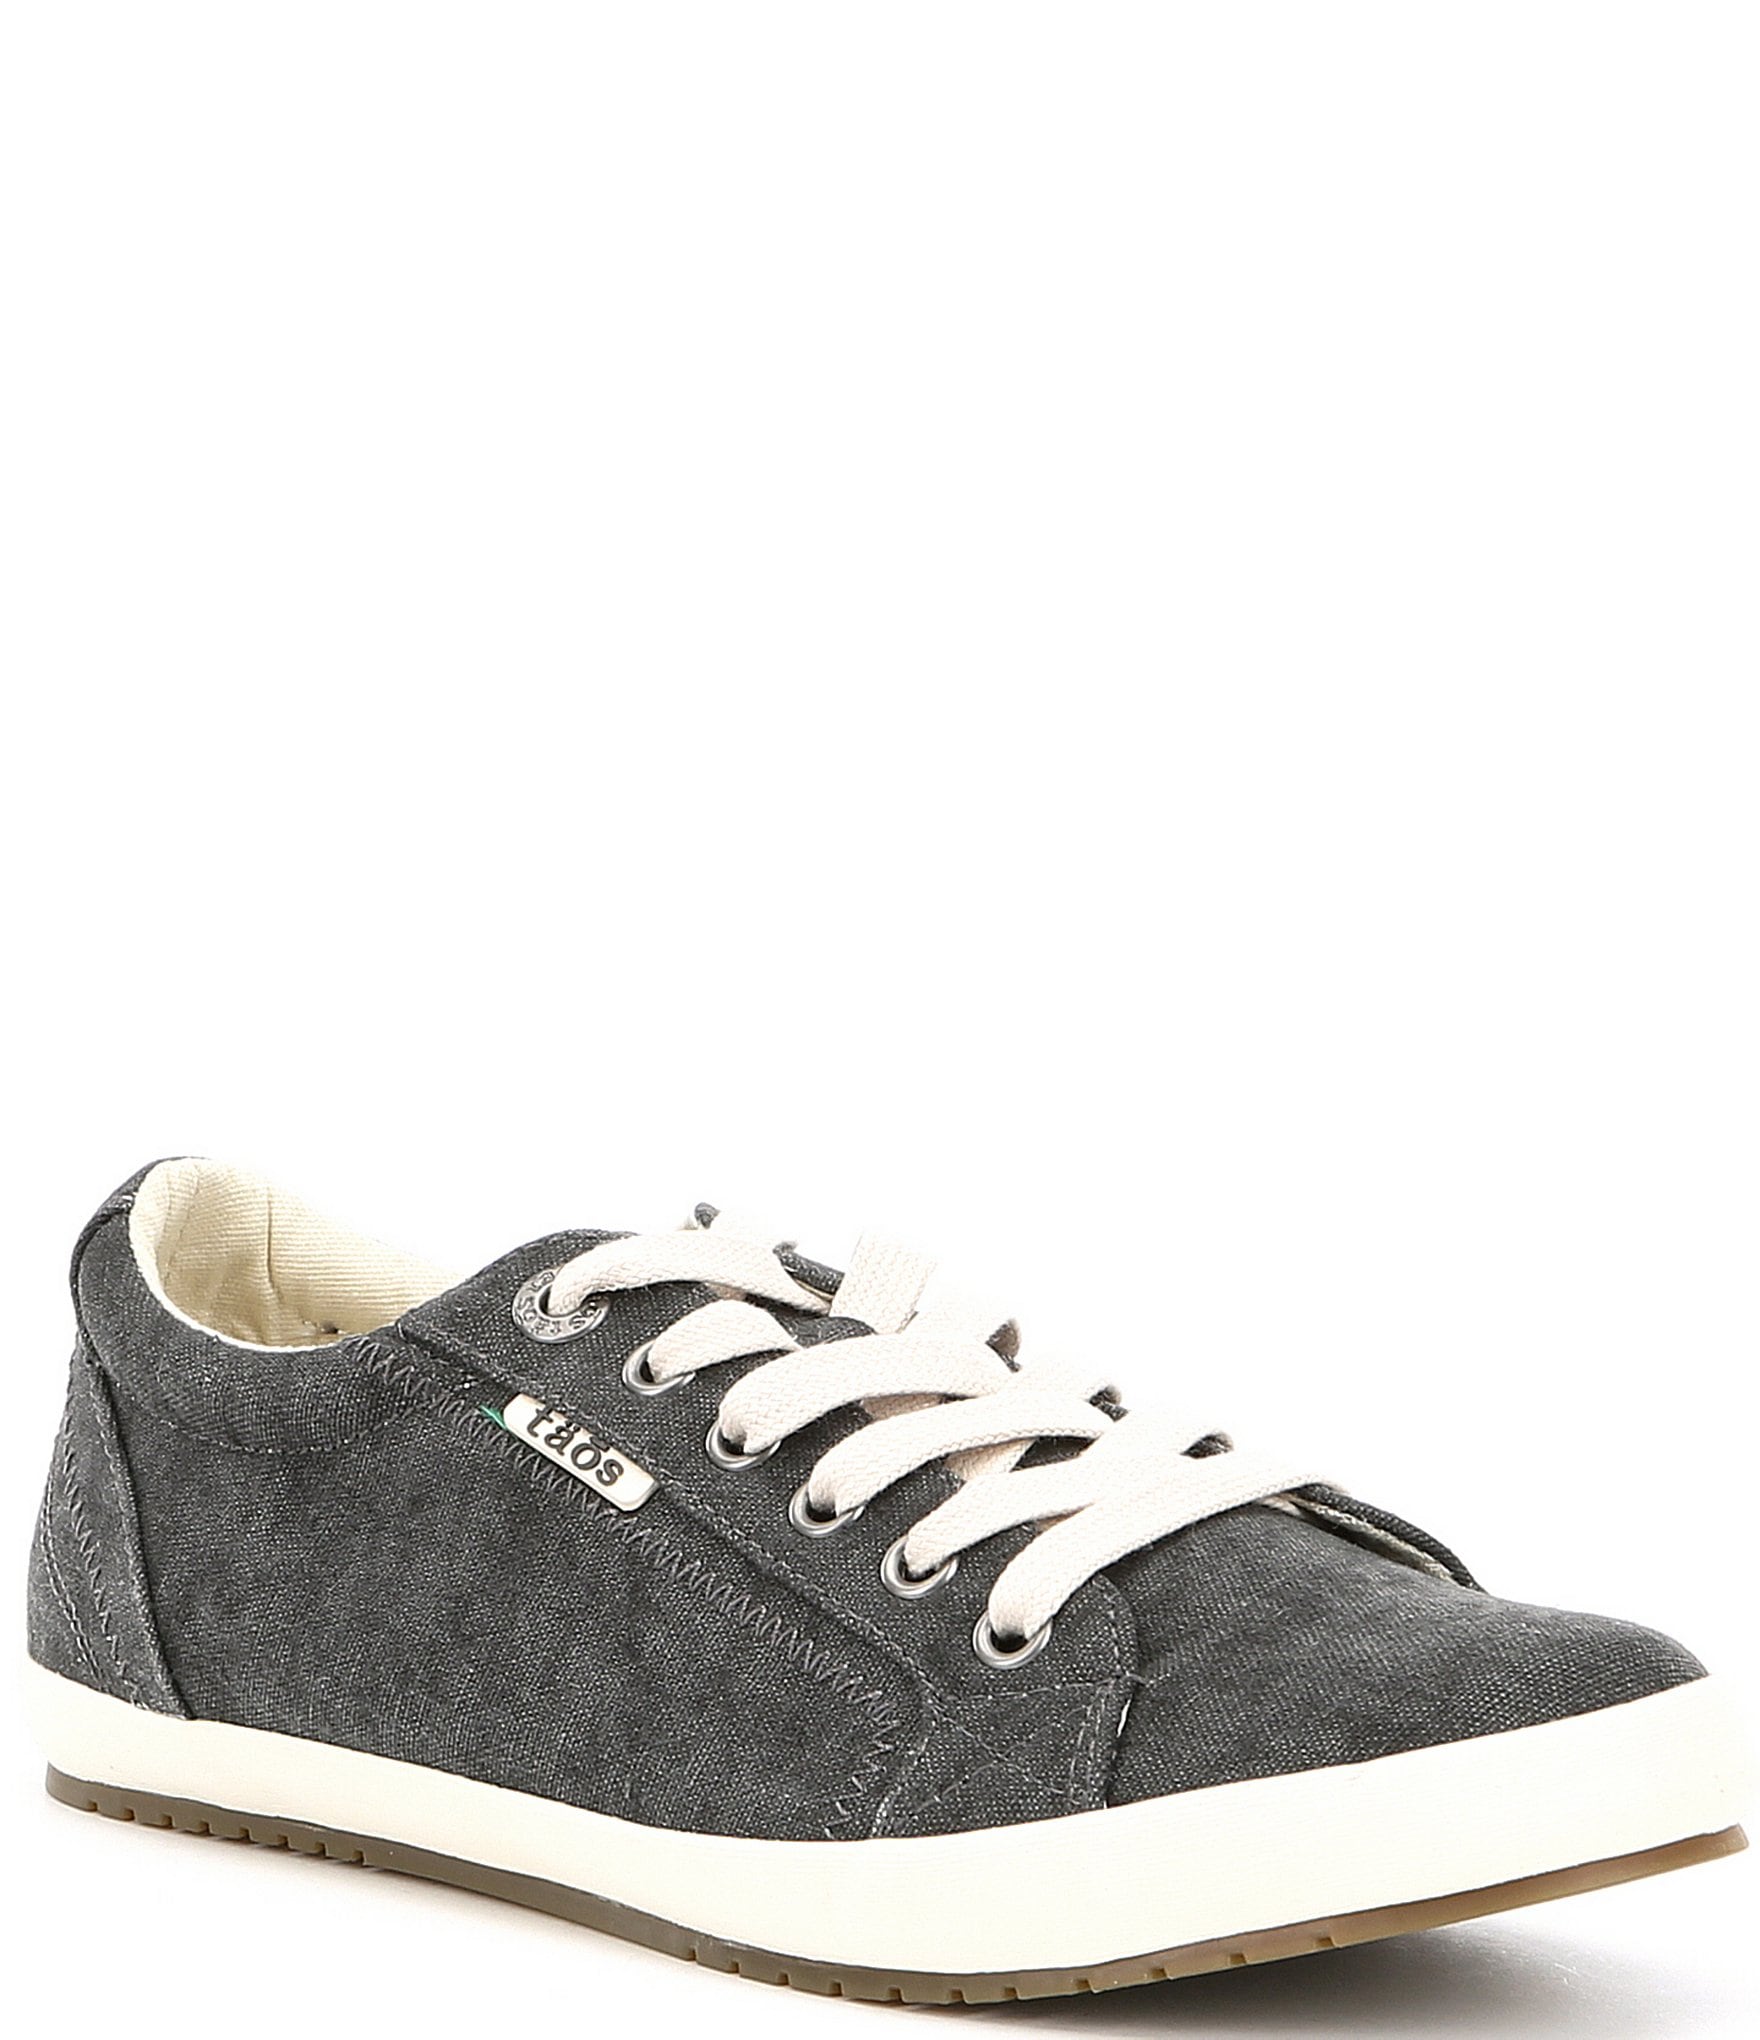 Taos Footwear Star Washed Canvas Lace-Up Sneakers | Dillard's